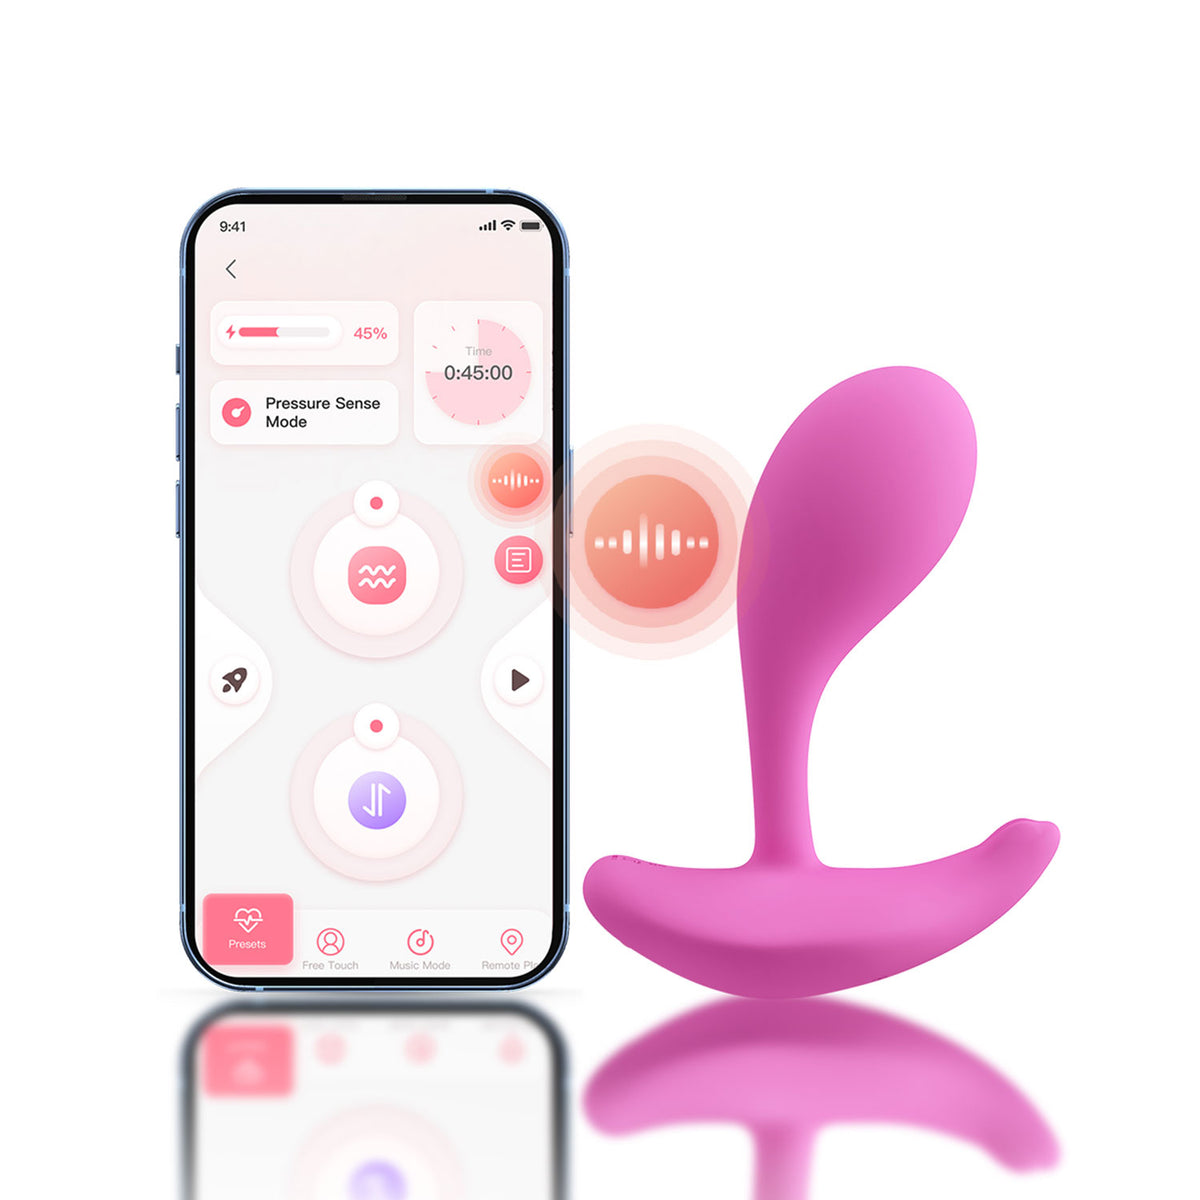 Oly 2 - App Enabled - Clit and G-Spot Vibrator -  Pink